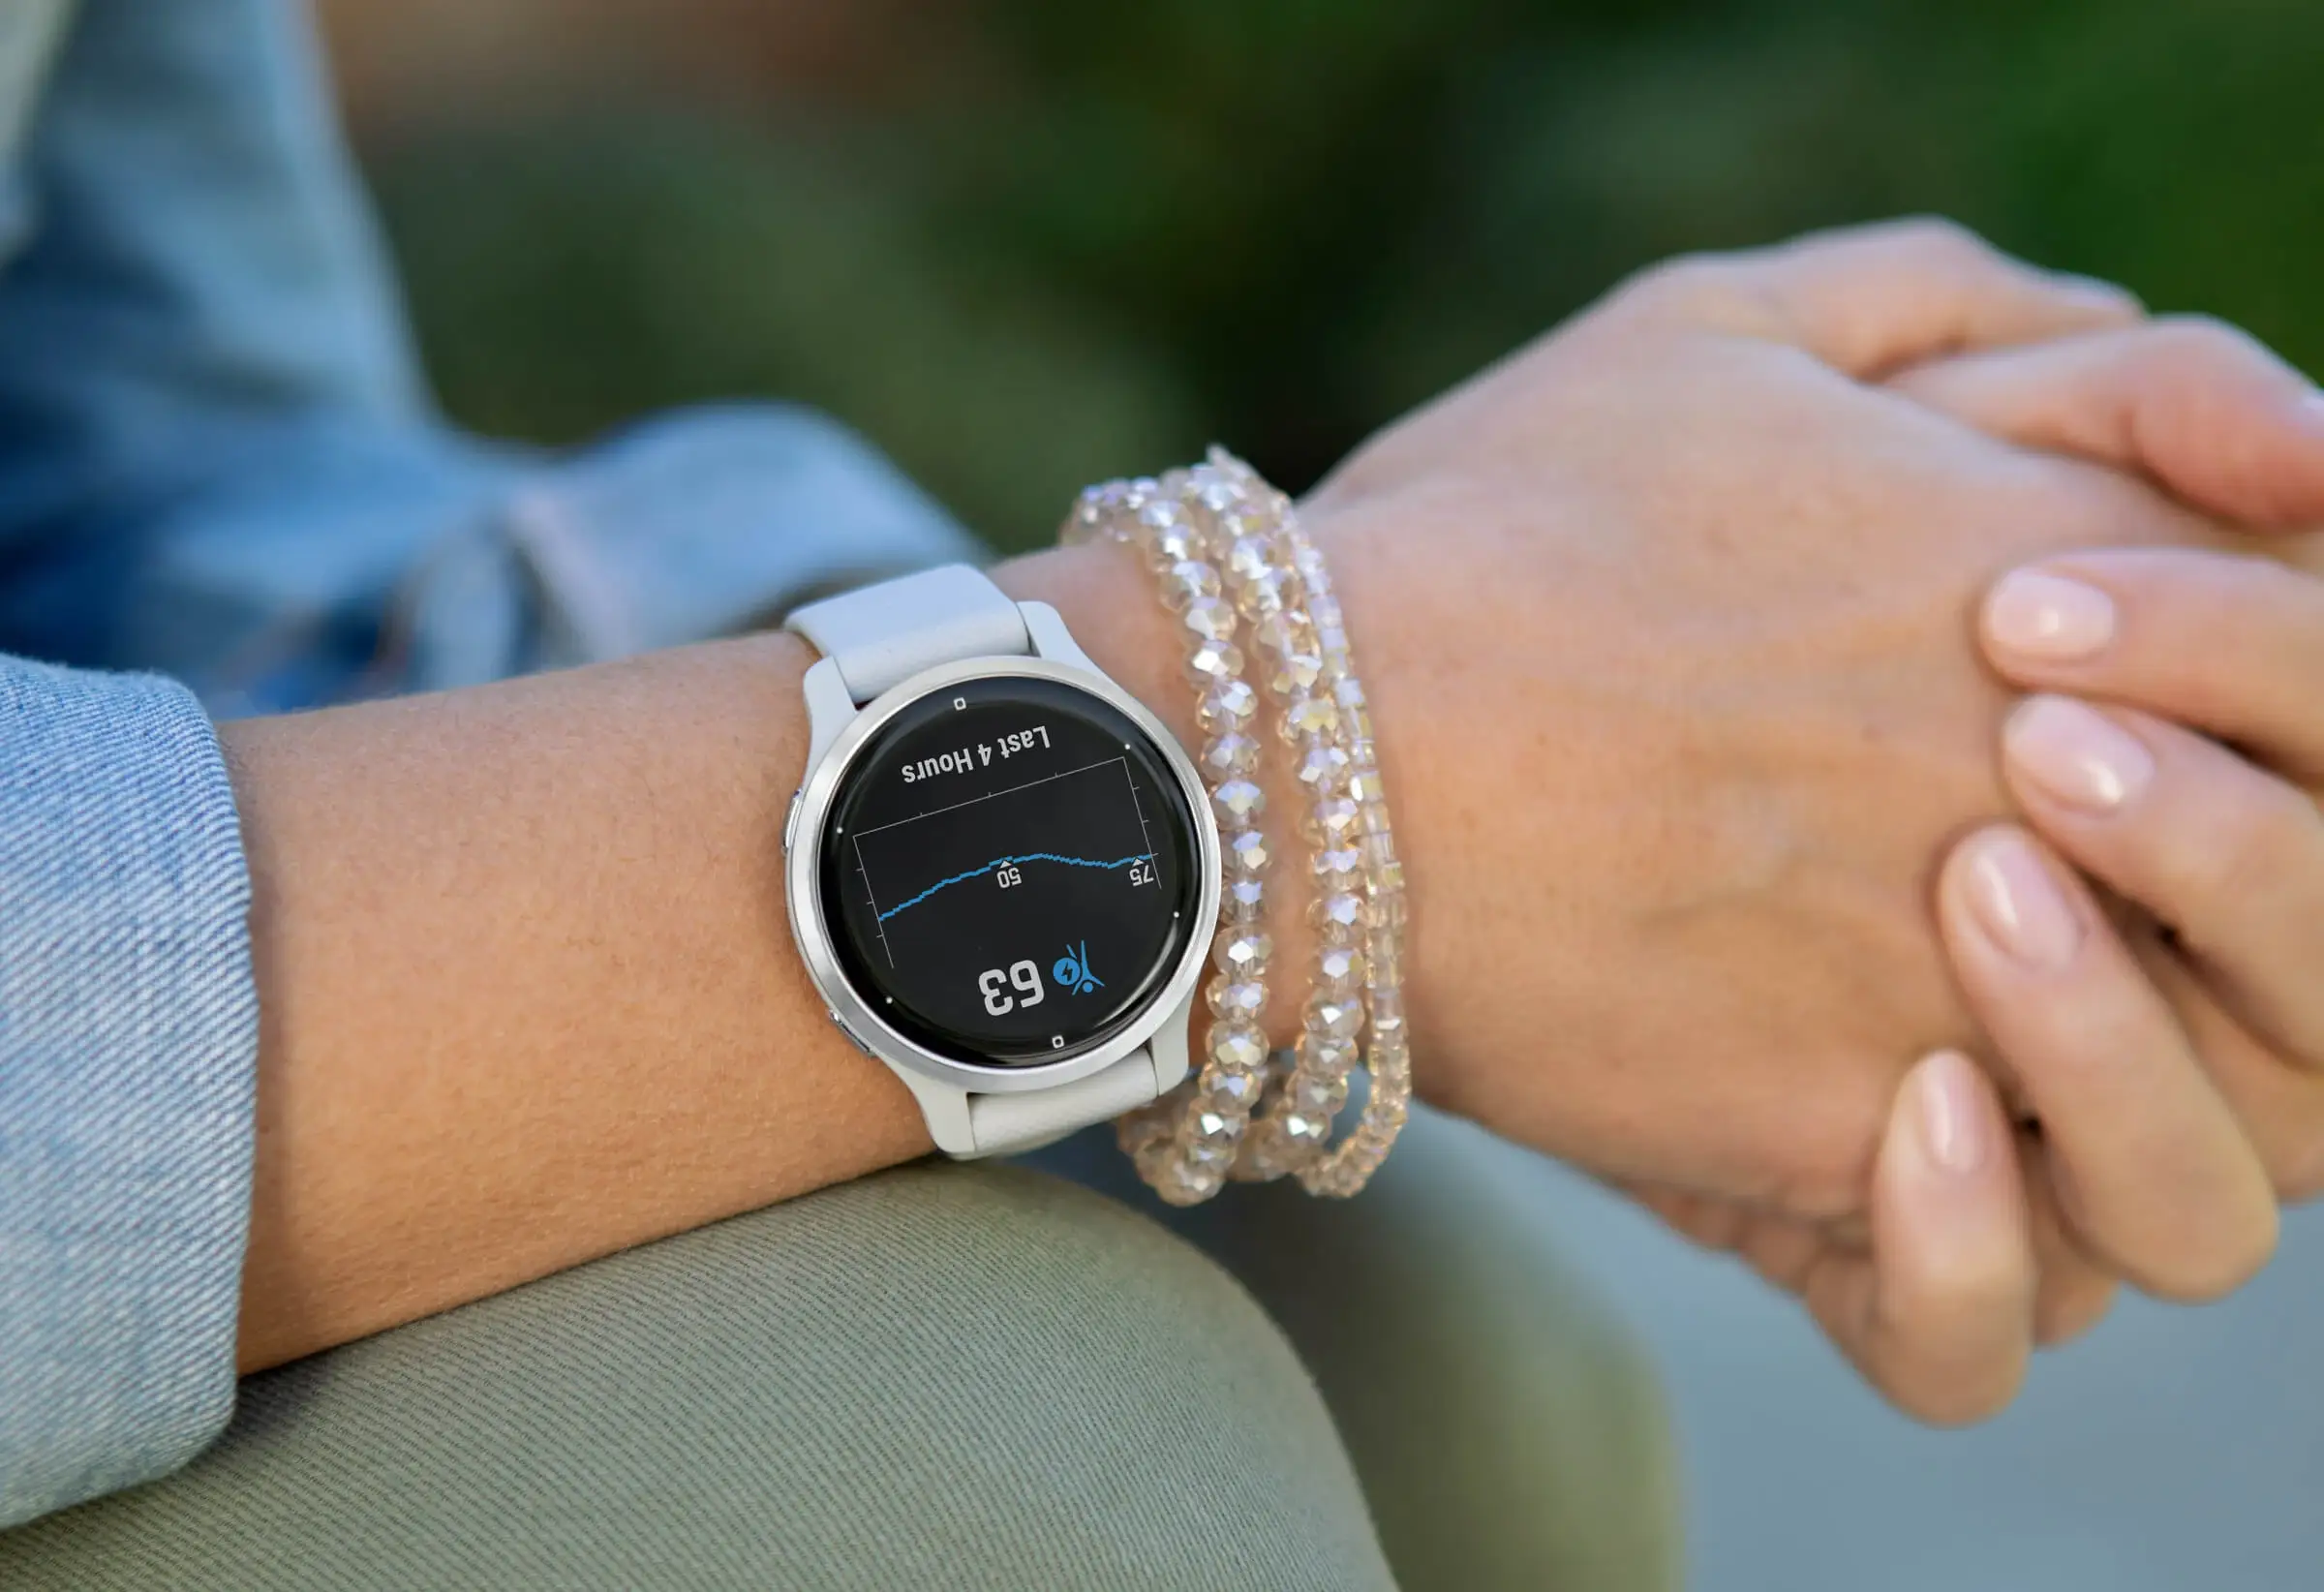 Garmin Smartwatch Features and Benefits to Look Out For